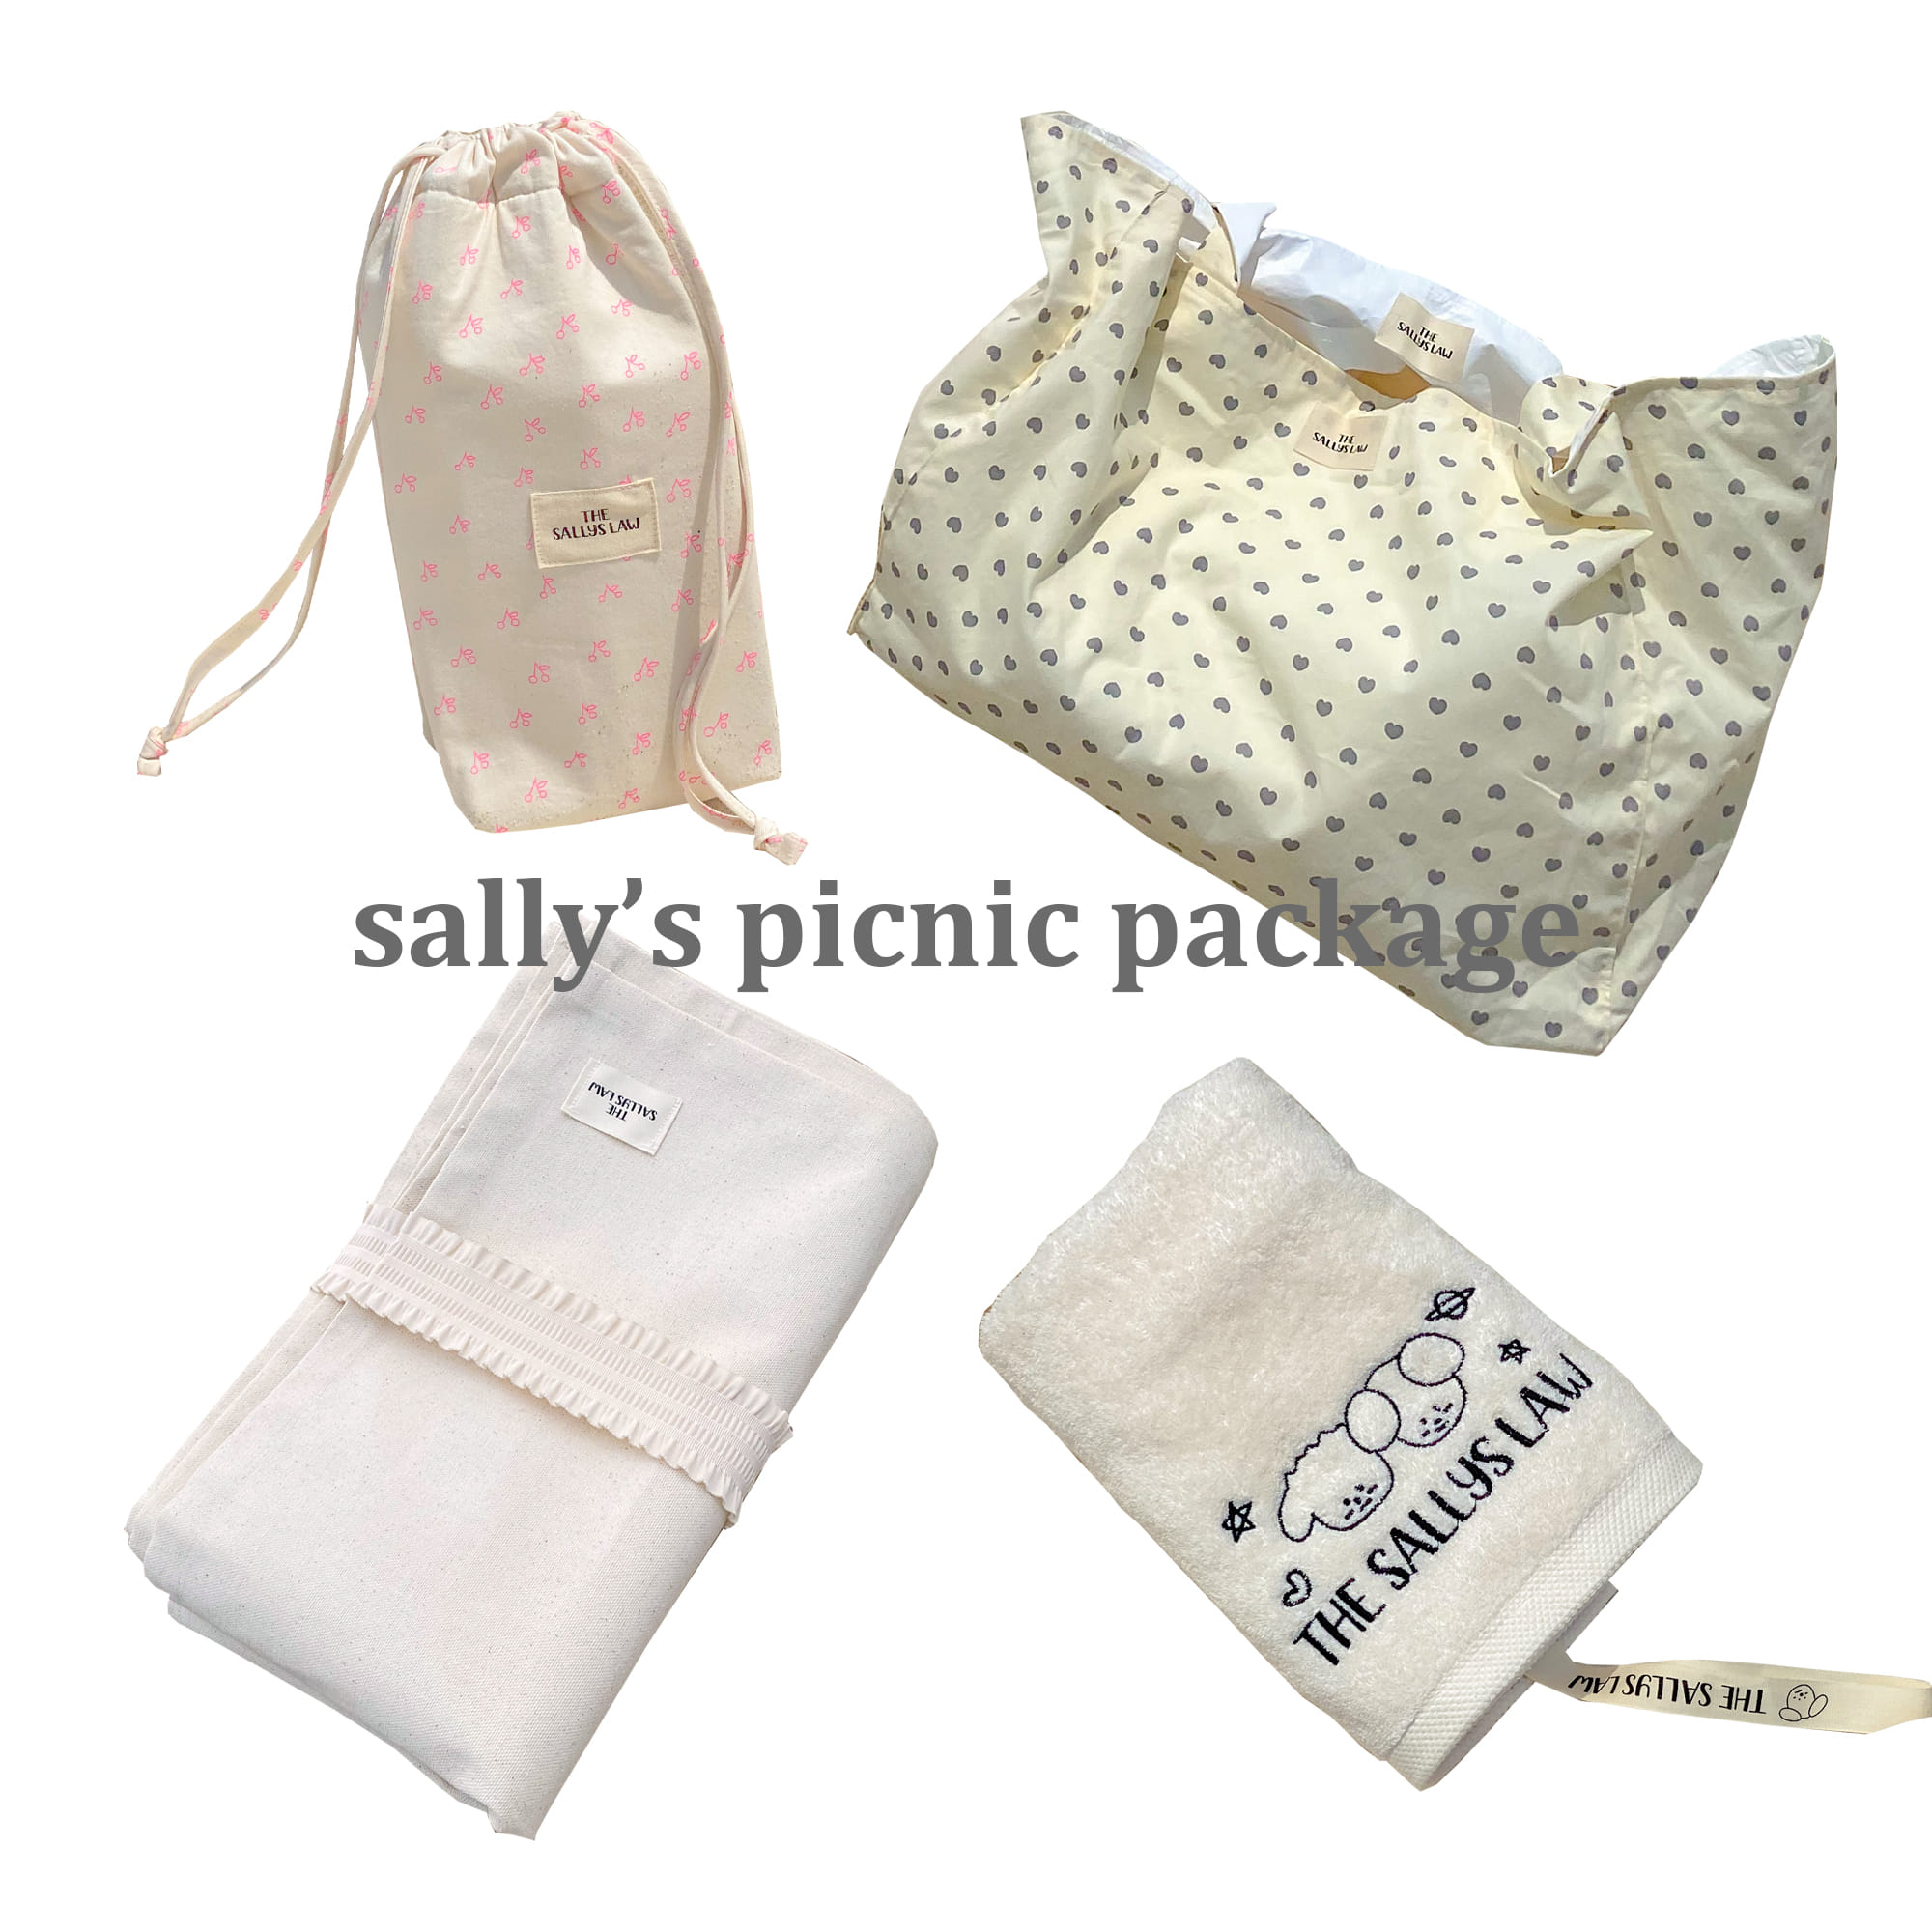 Picnic set package